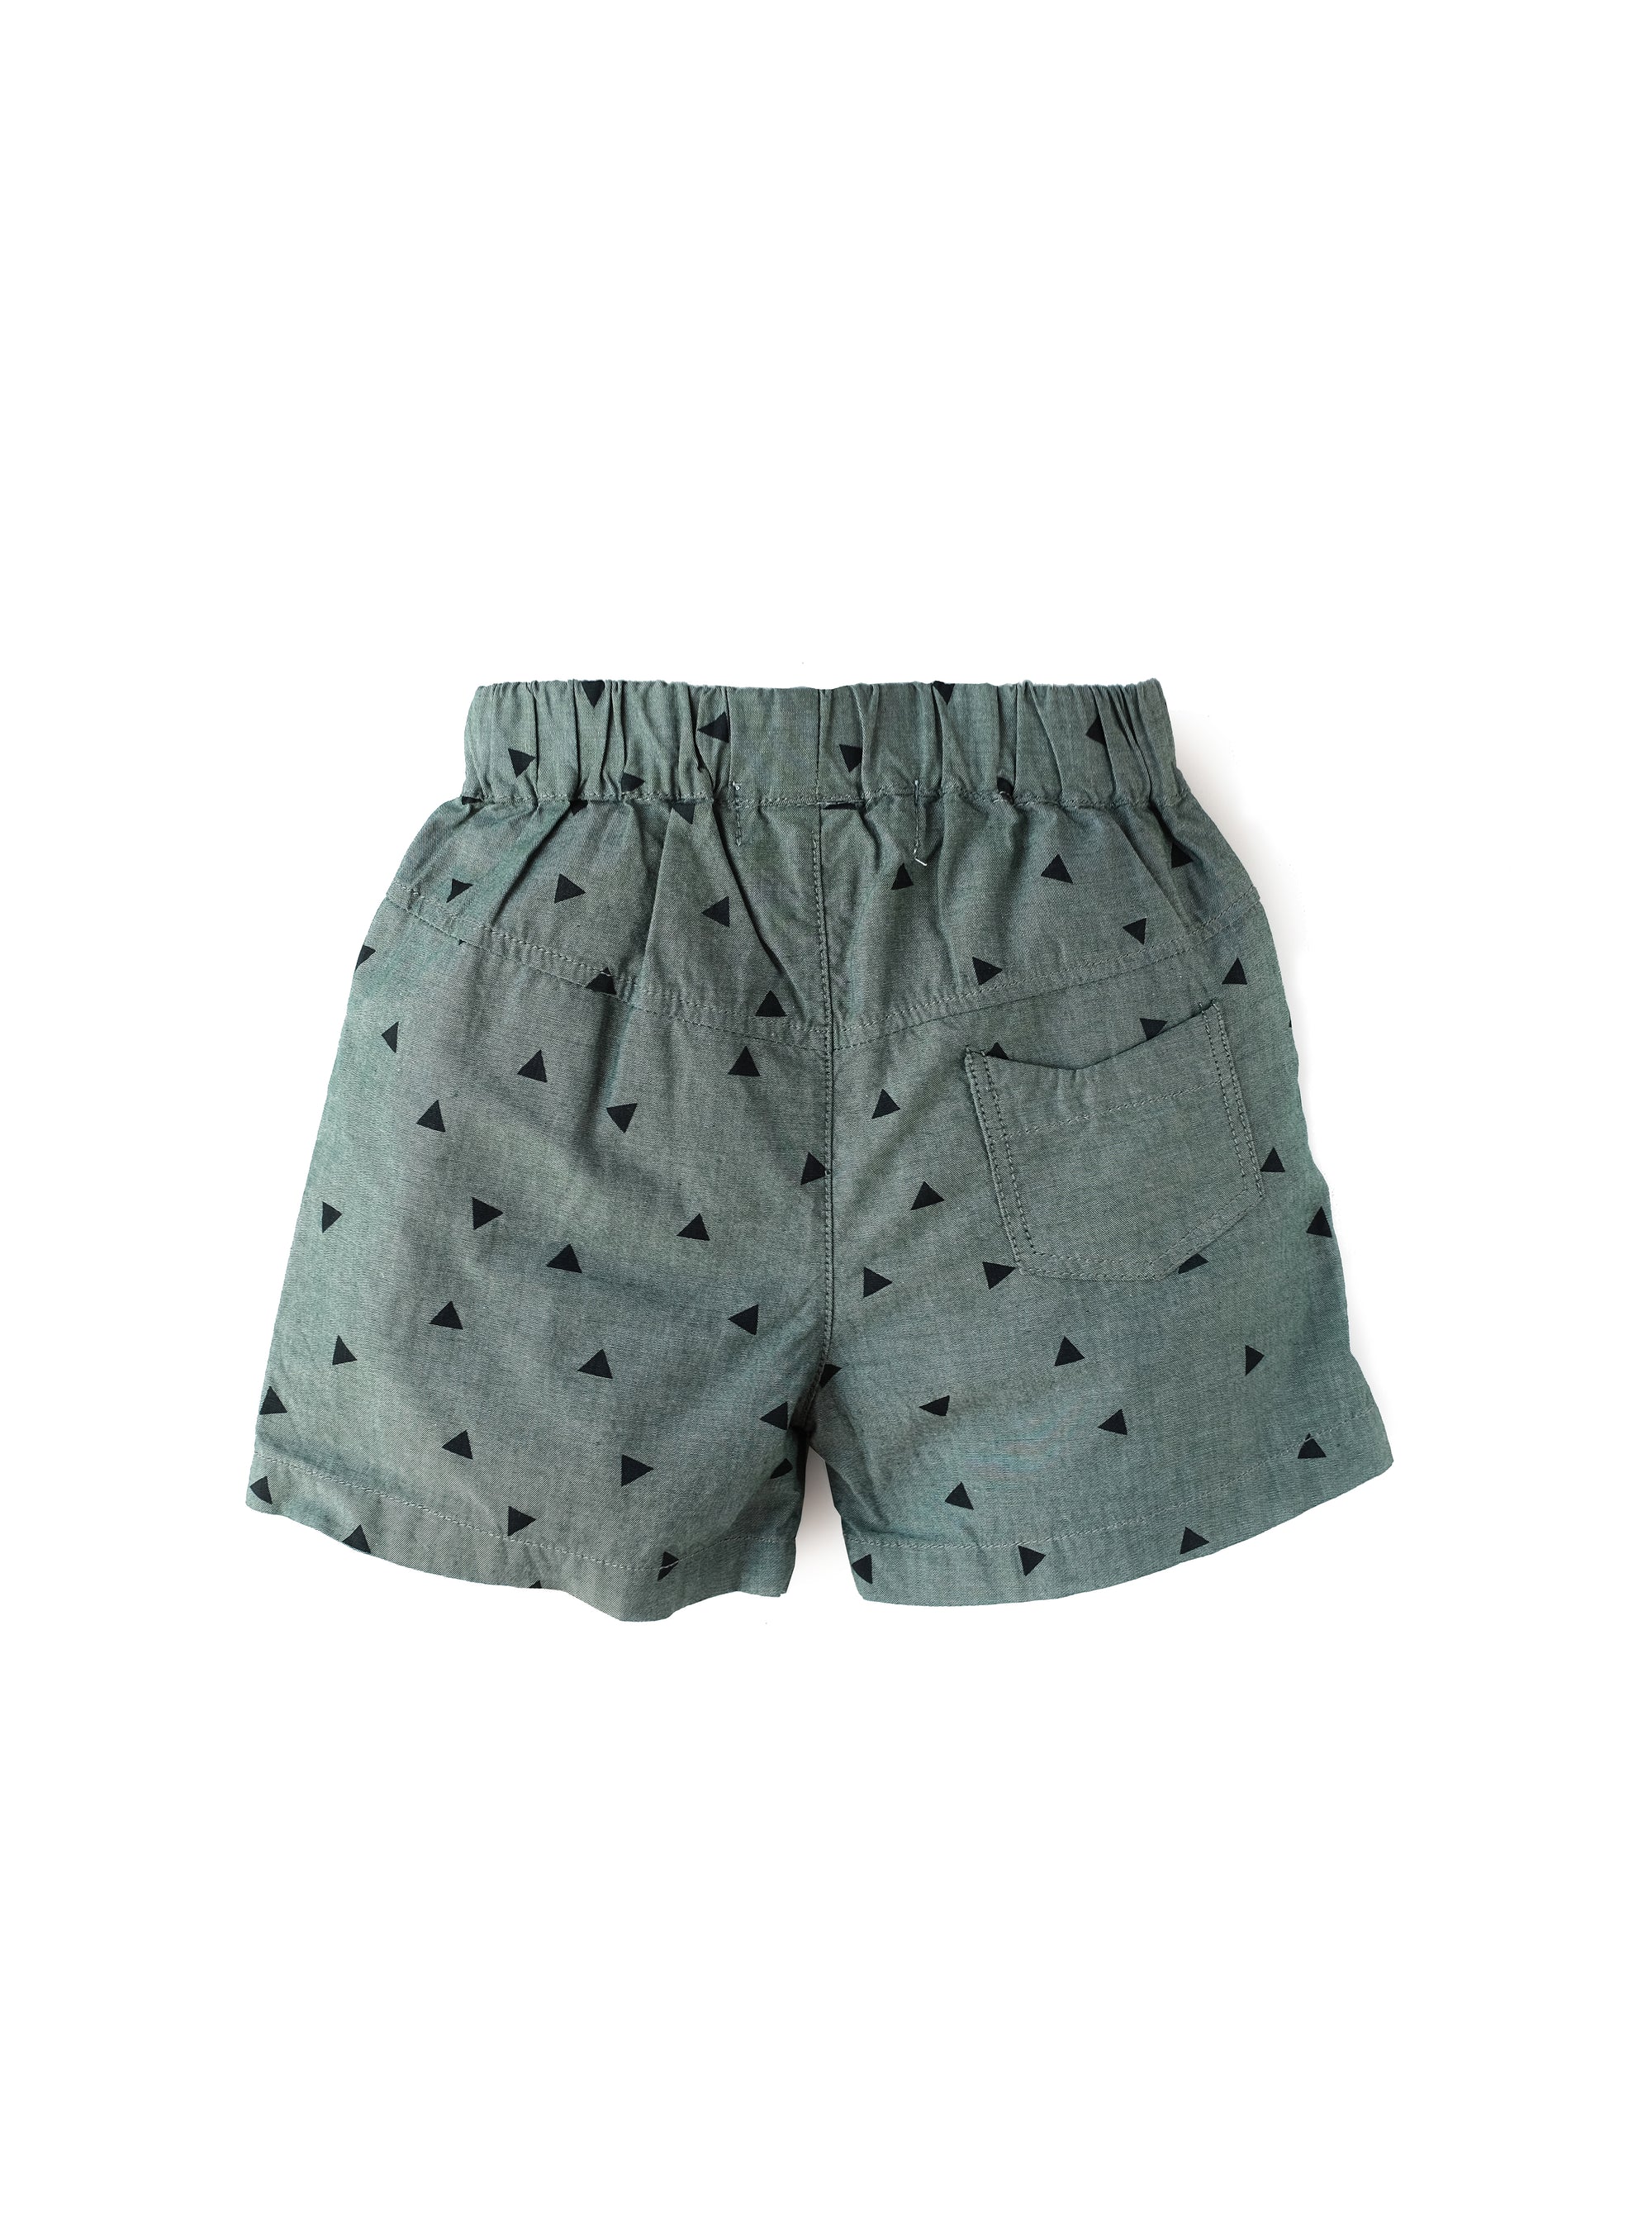 forest green shorts with triangle pattern